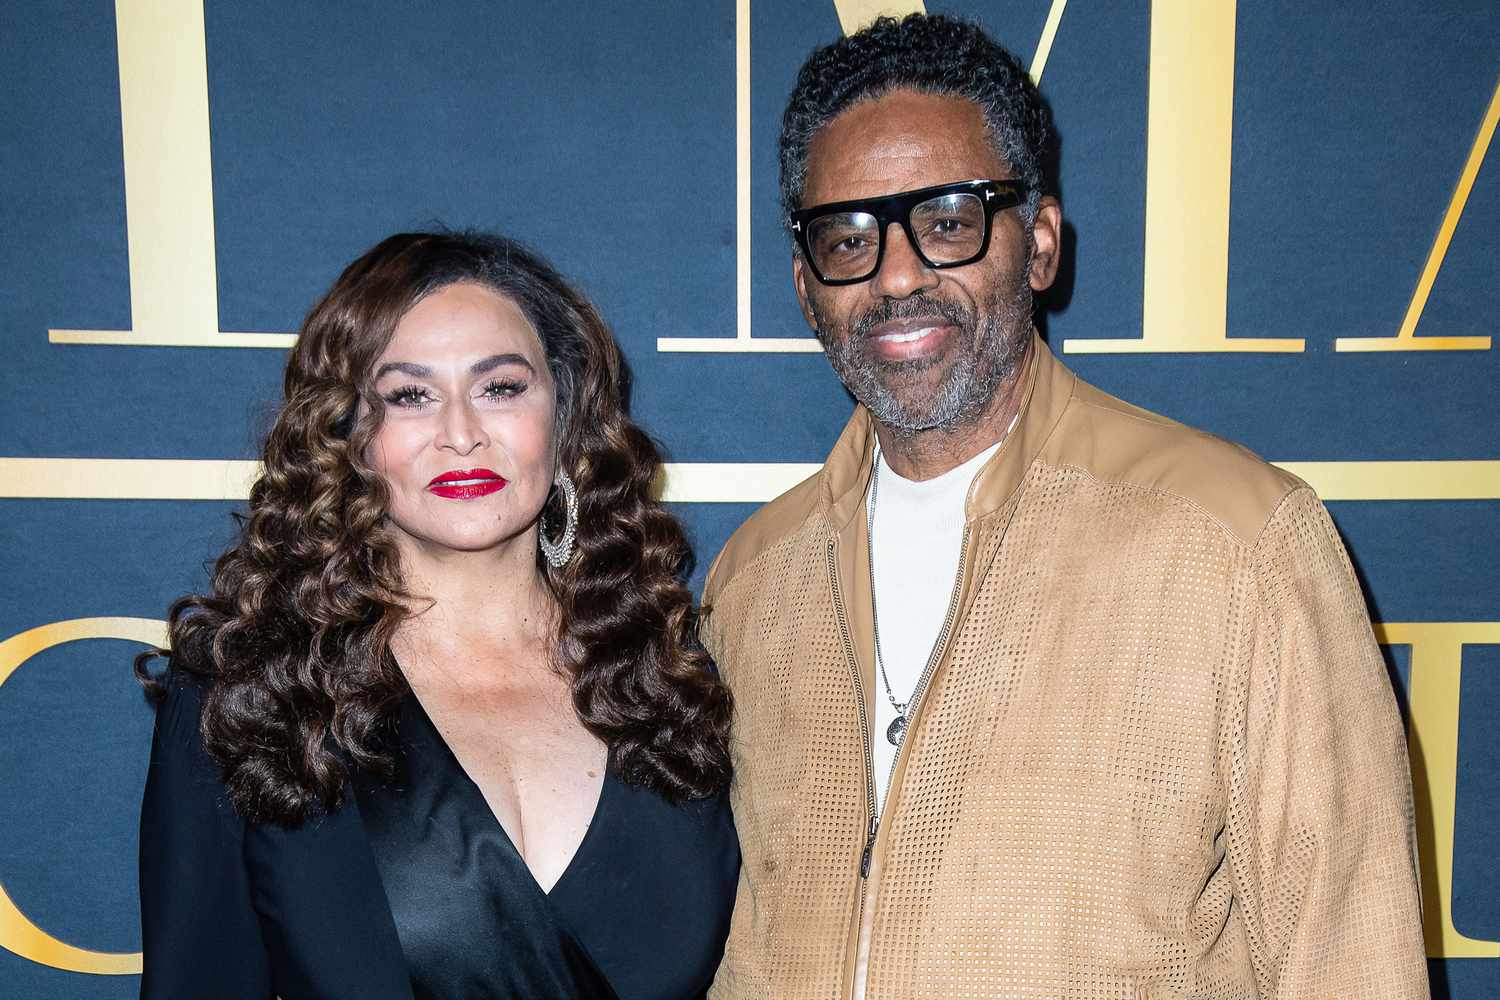 BEYONCE MOM SHOCKS FANS WITH DIVORCE FILING FROM ACTOR RICHARD LAWSON 12